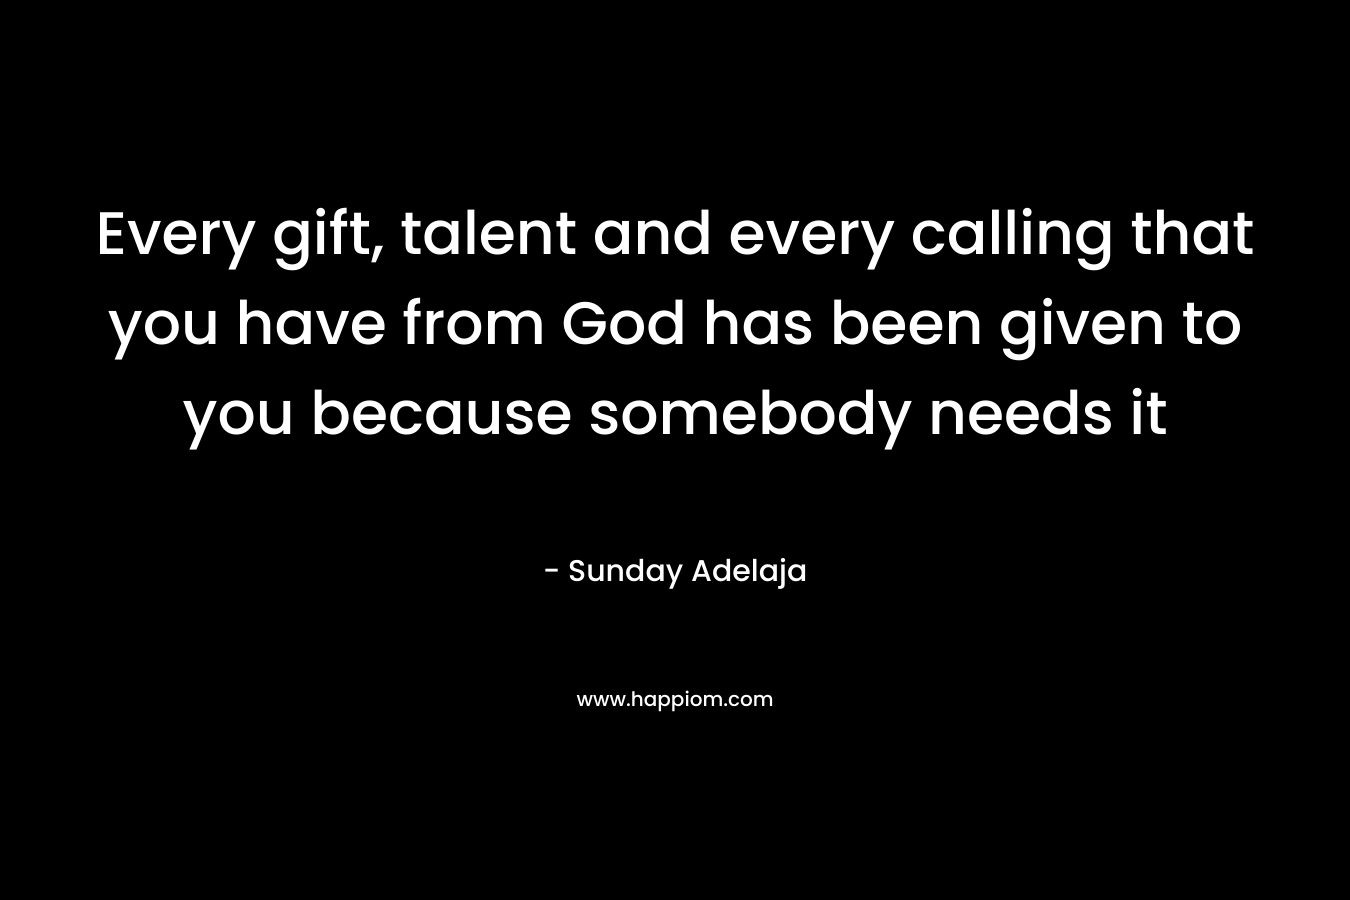 Every gift, talent and every calling that you have from God has been given to you because somebody needs it